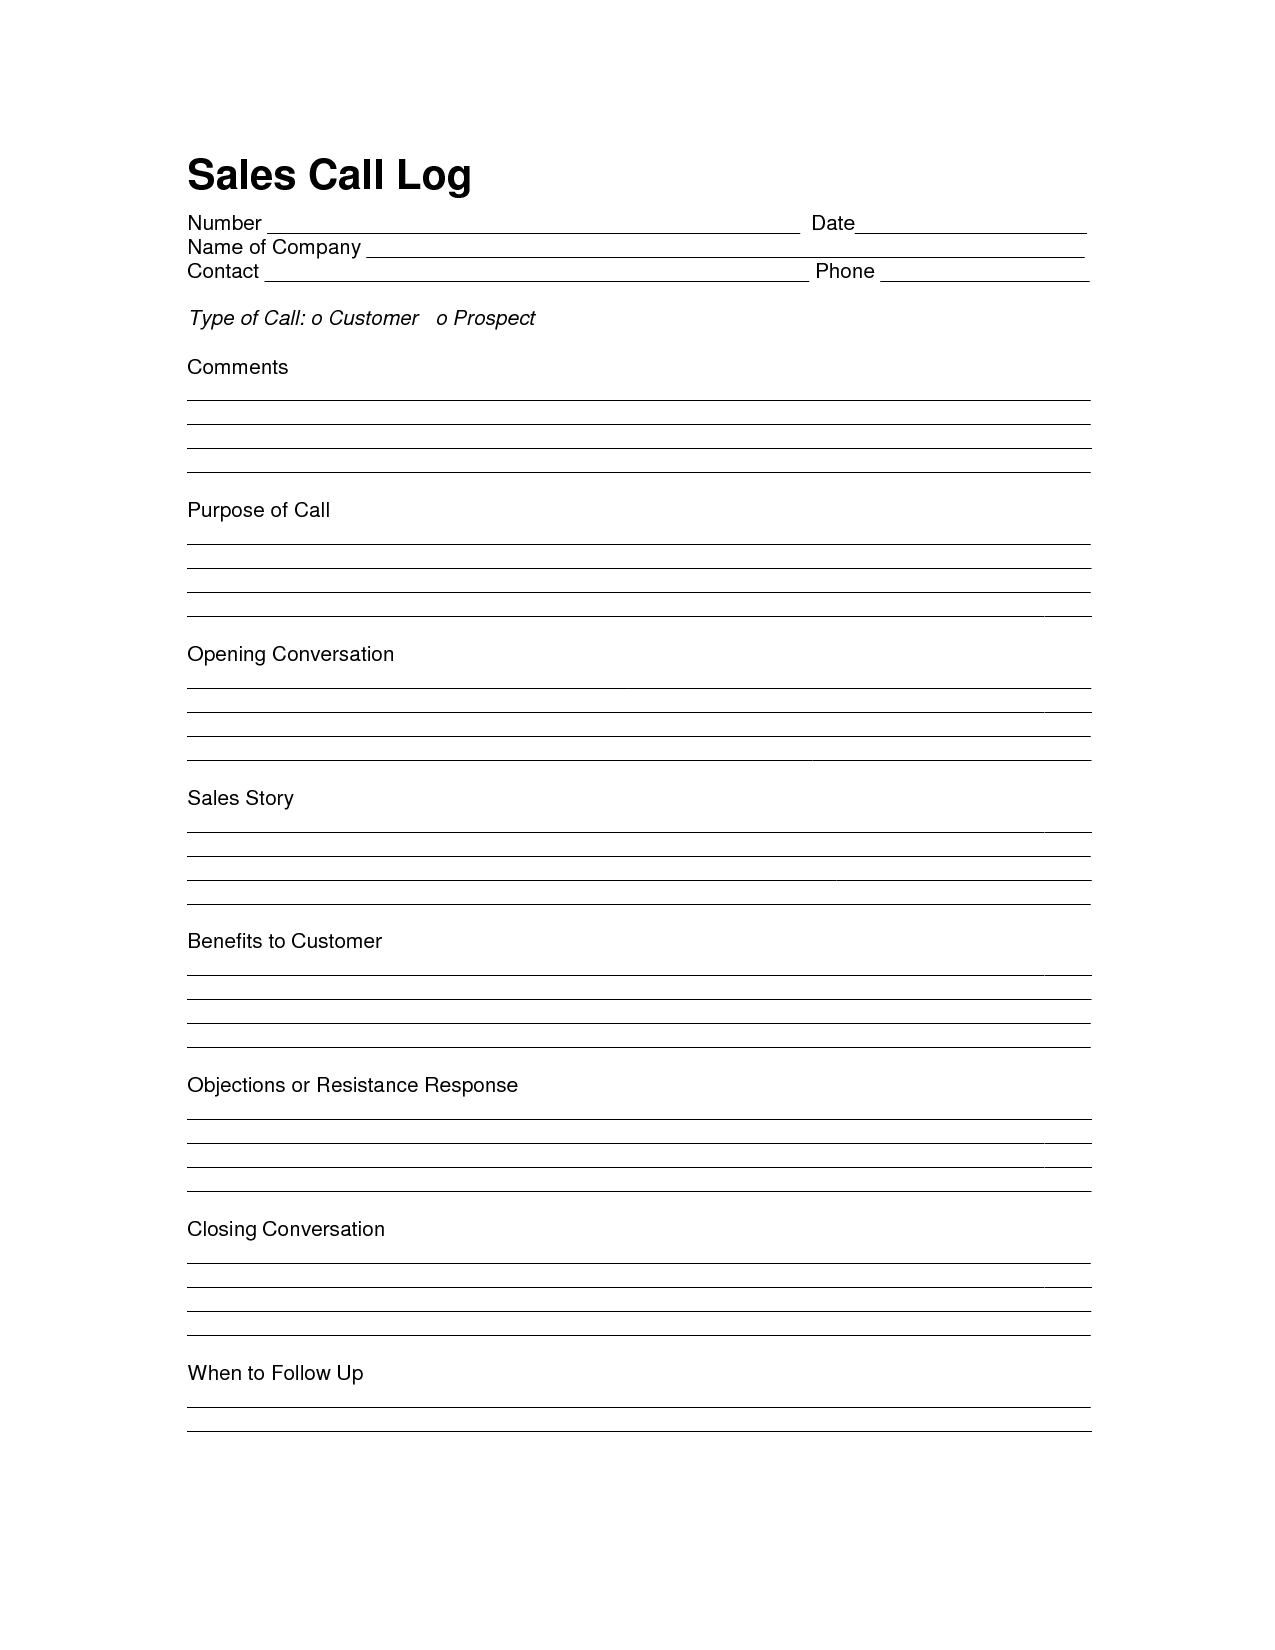 Sales Log Sheet Template | Sales Call Log Template | Call For Sales Call Reports Templates Free